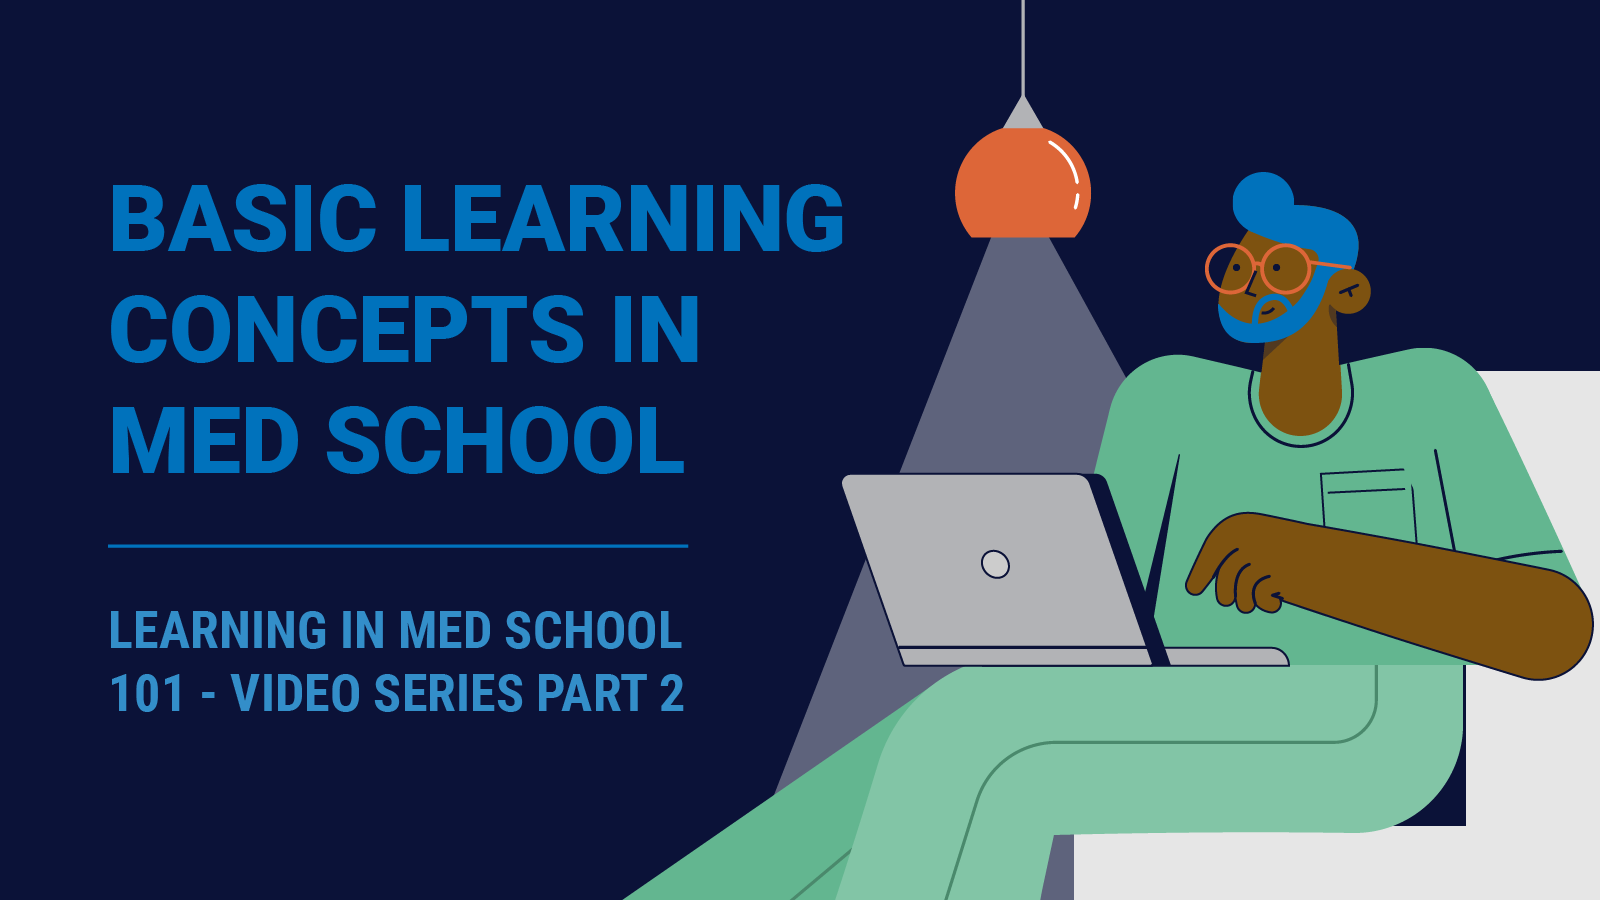 Featured image for “Basic Learning Concepts in Med School”